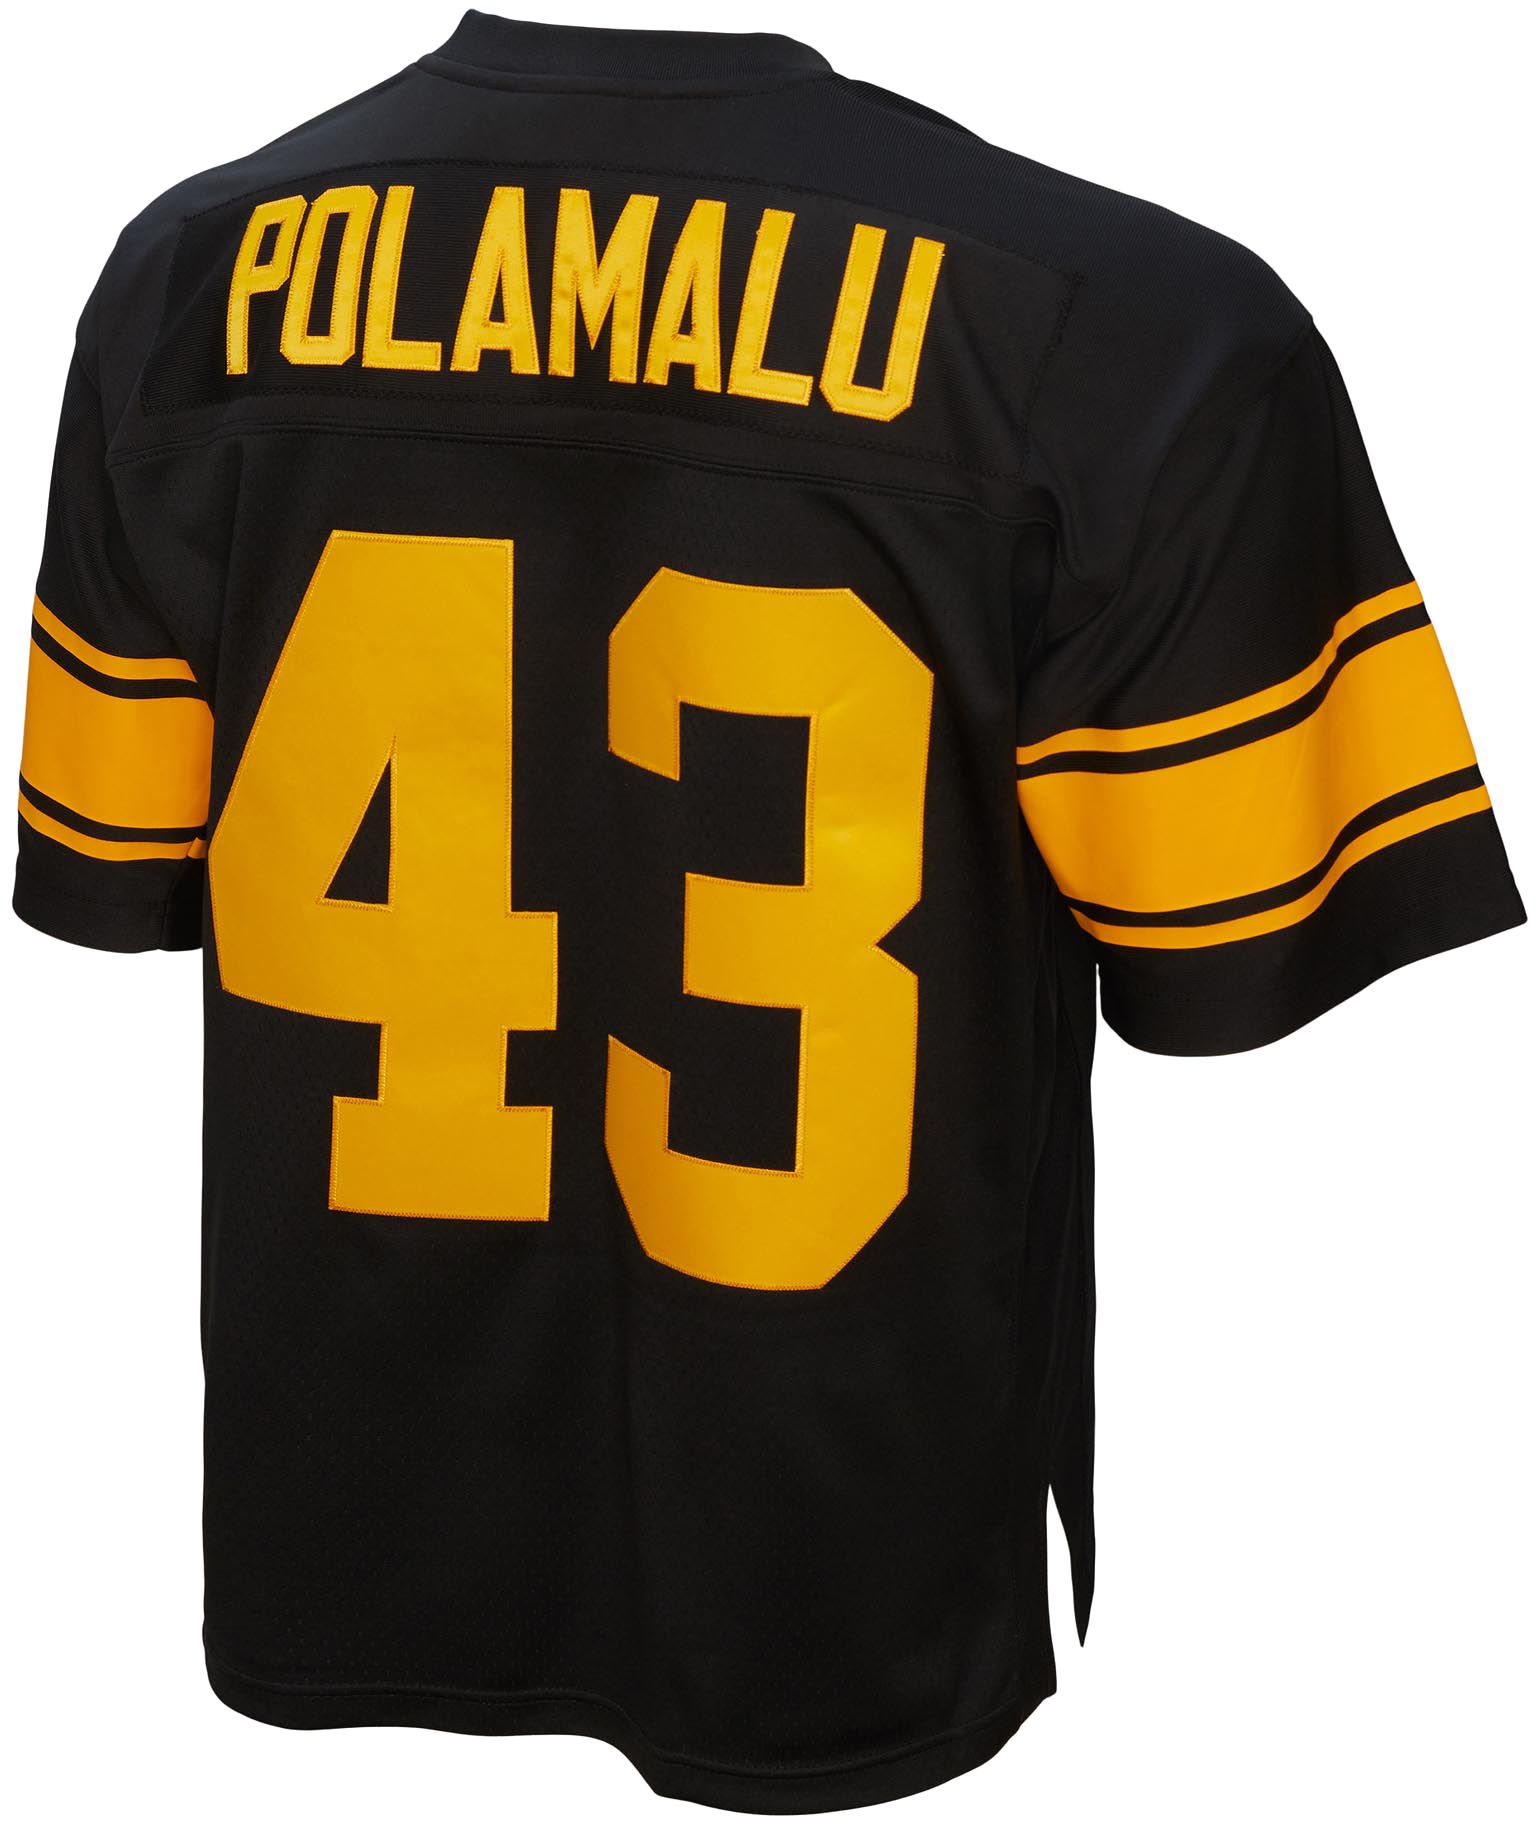 Mitchell And Ness 1967 Pittsburgh Steelers No43 Troy Polamalu Black/Yelllow Throwback Men's Stitched NFL Jersey